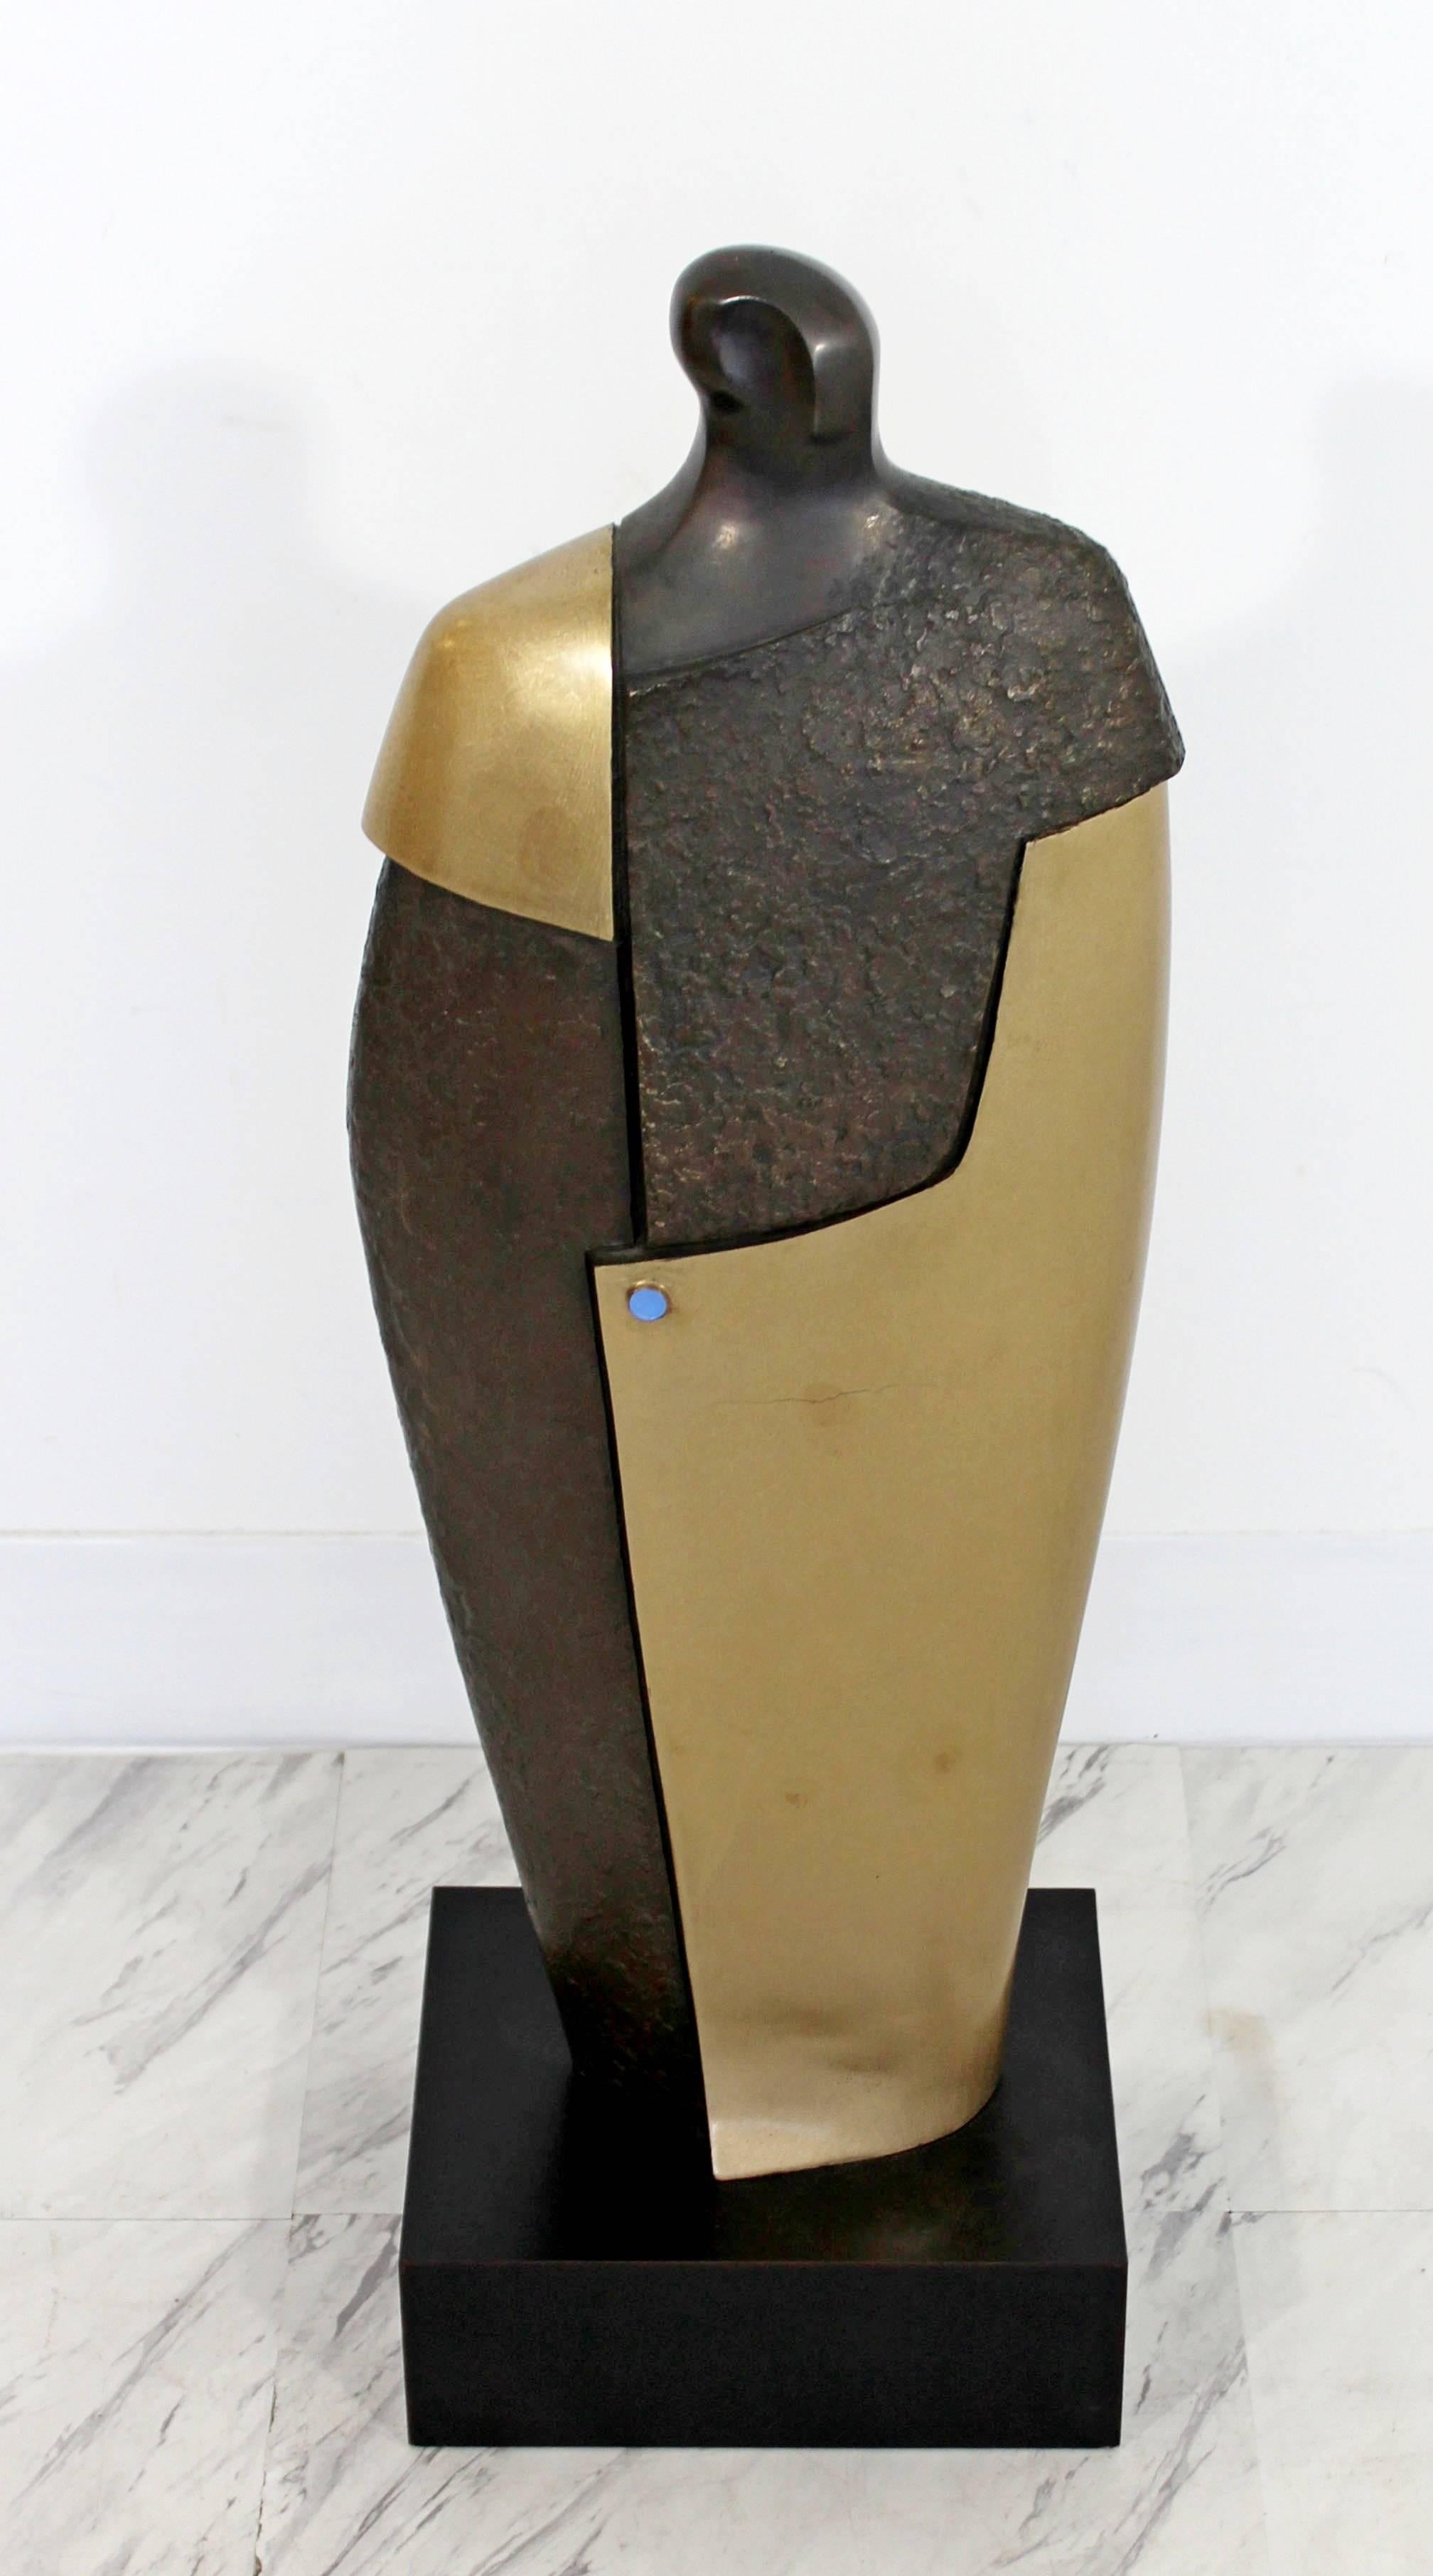 For your consideration is a fabulous bronze table sculpture of an abstracted figure, signed and numbered 2/6 by John Baldwin. In excellent condition. The dimensions are 8.5